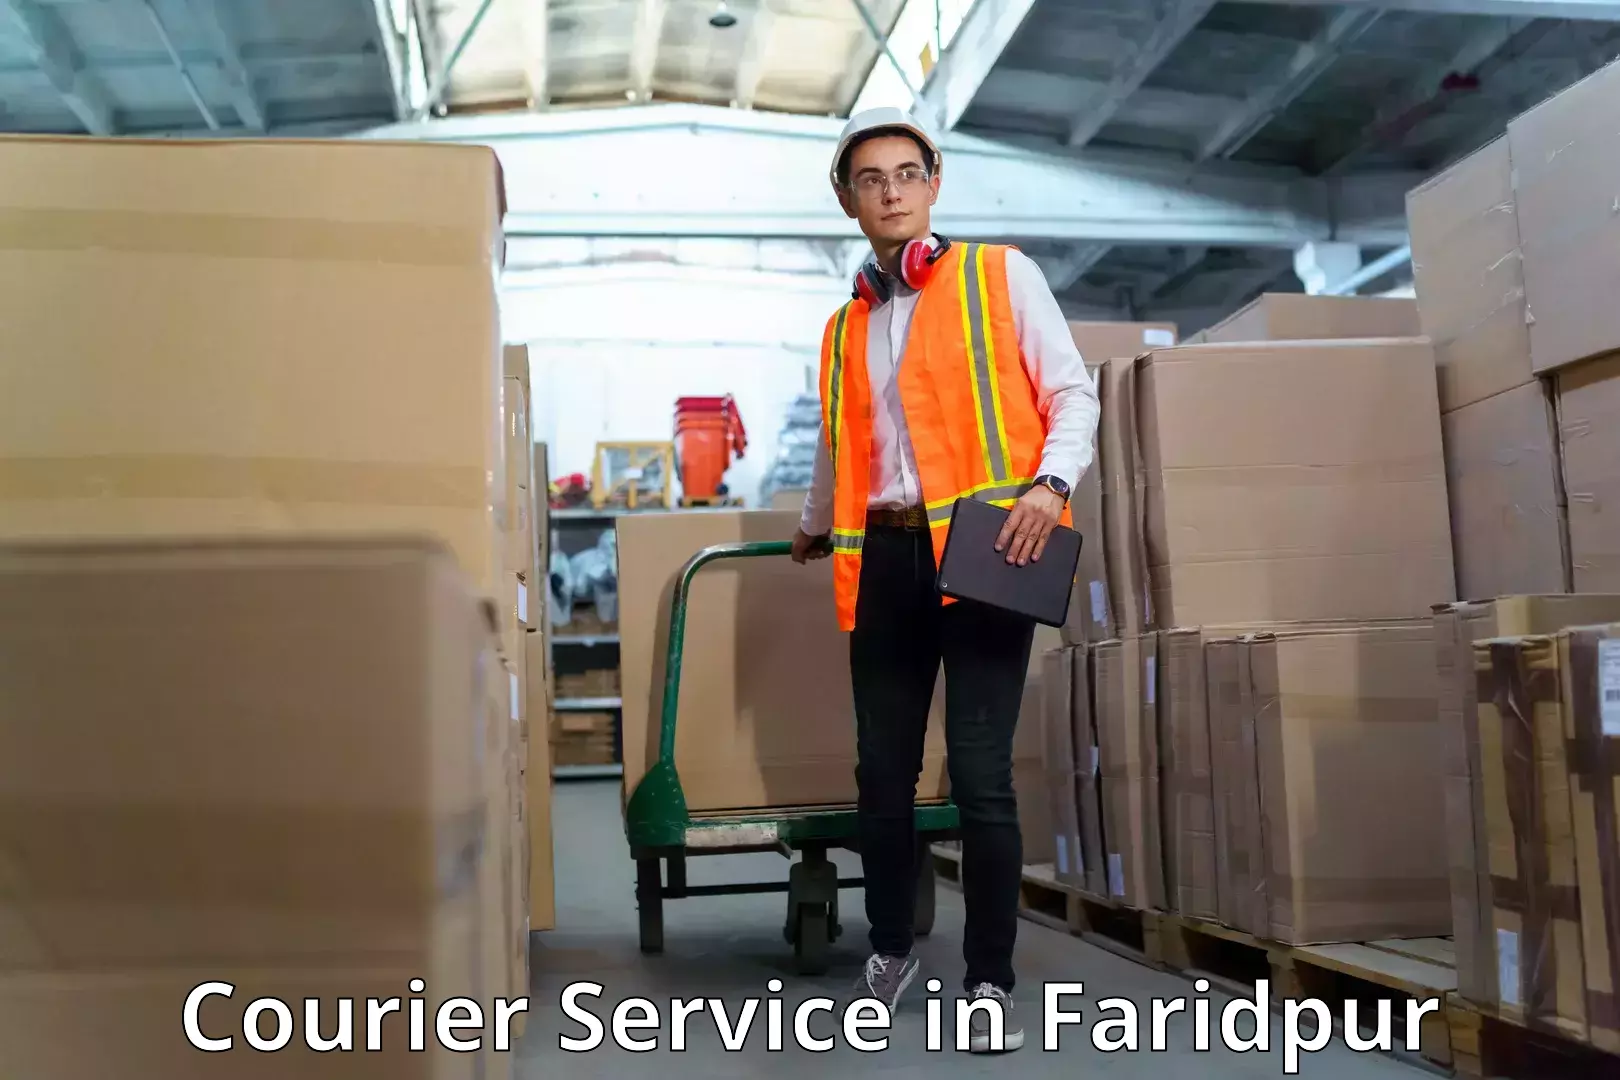 Full-service courier options in Faridpur